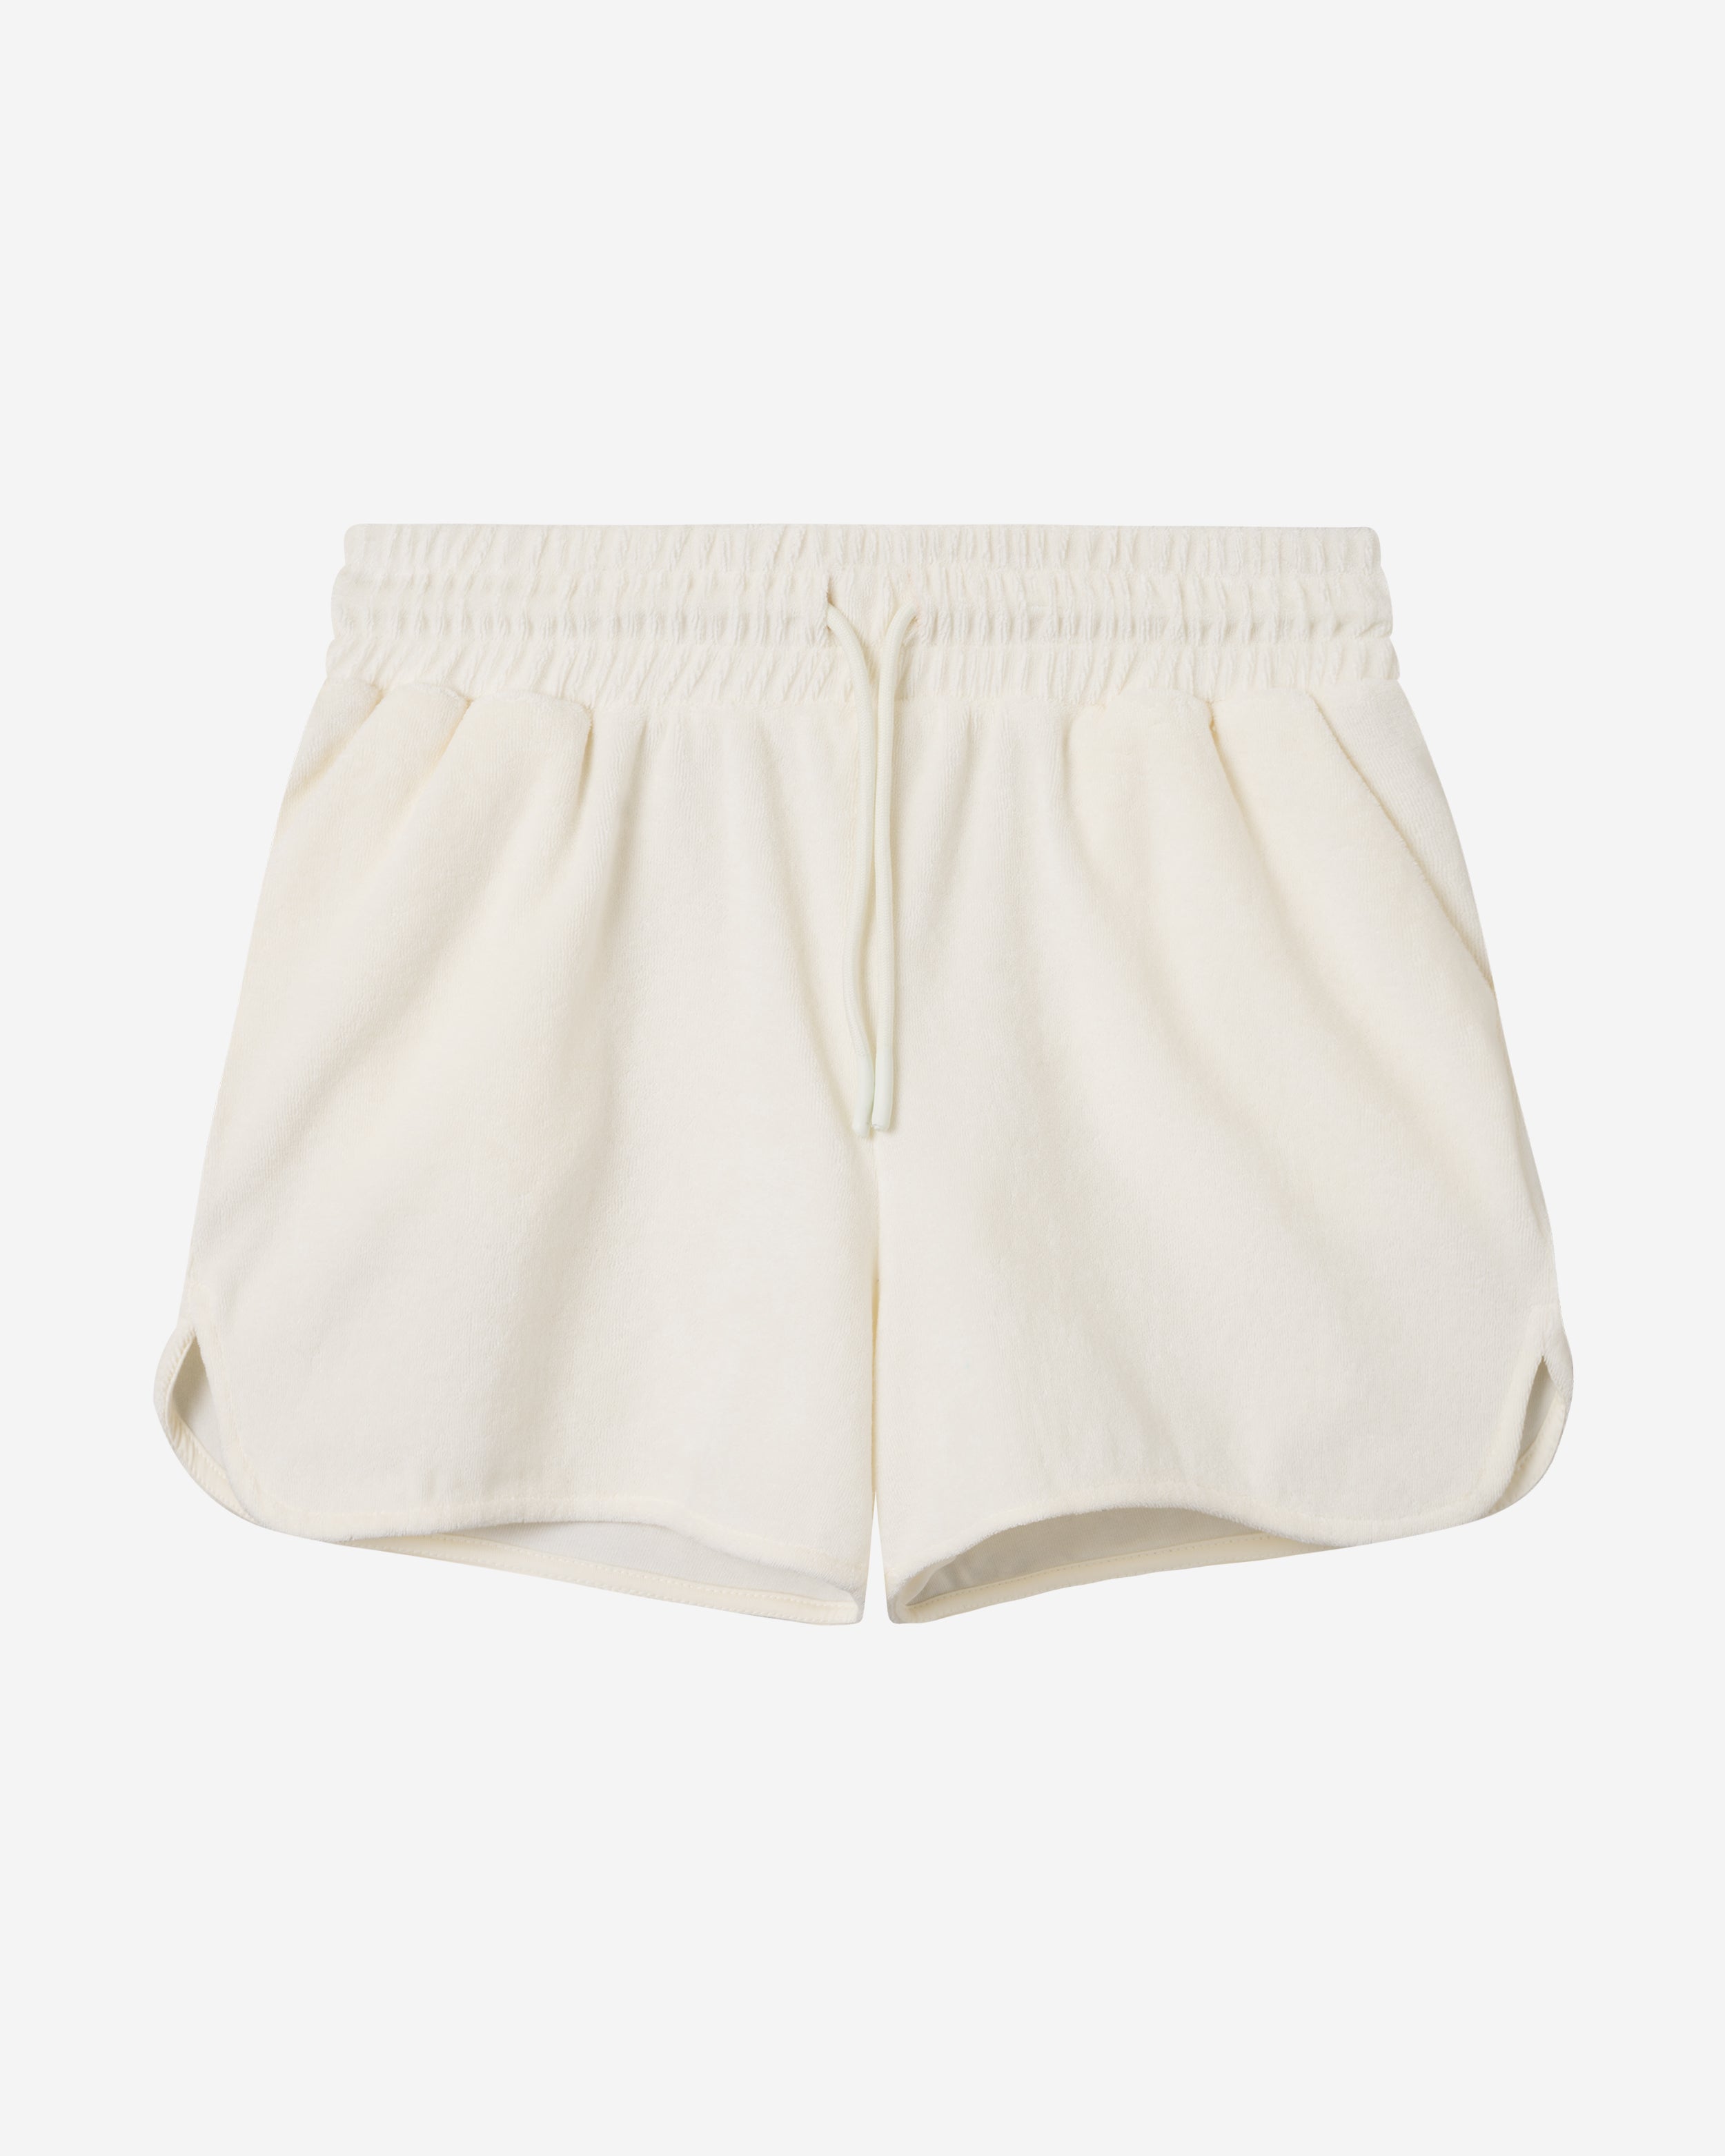 Off white low cut shorts in terry toweling fabric with drawstring and two side pockets.